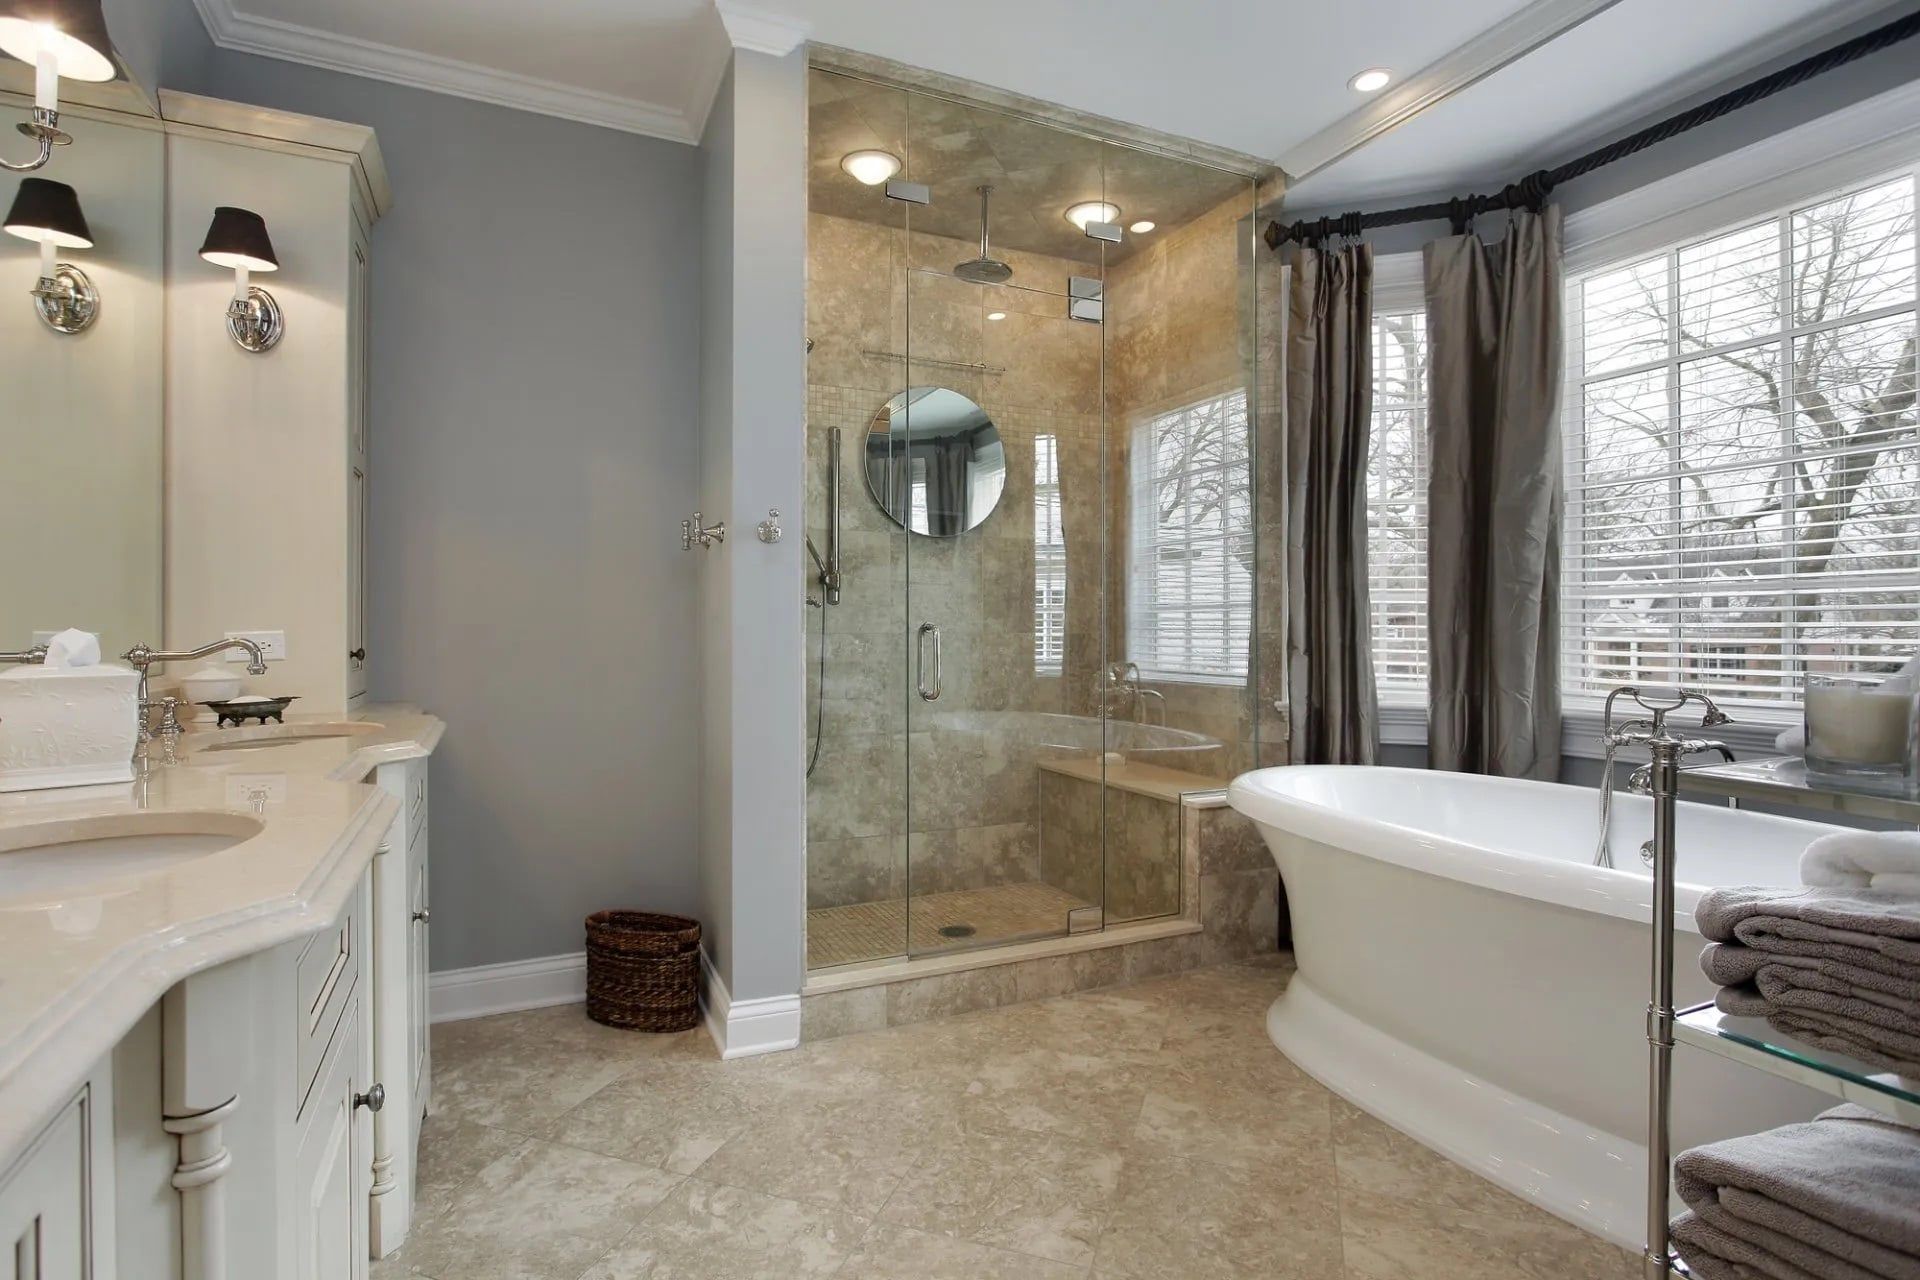 Why Remodel Your Bathroom?